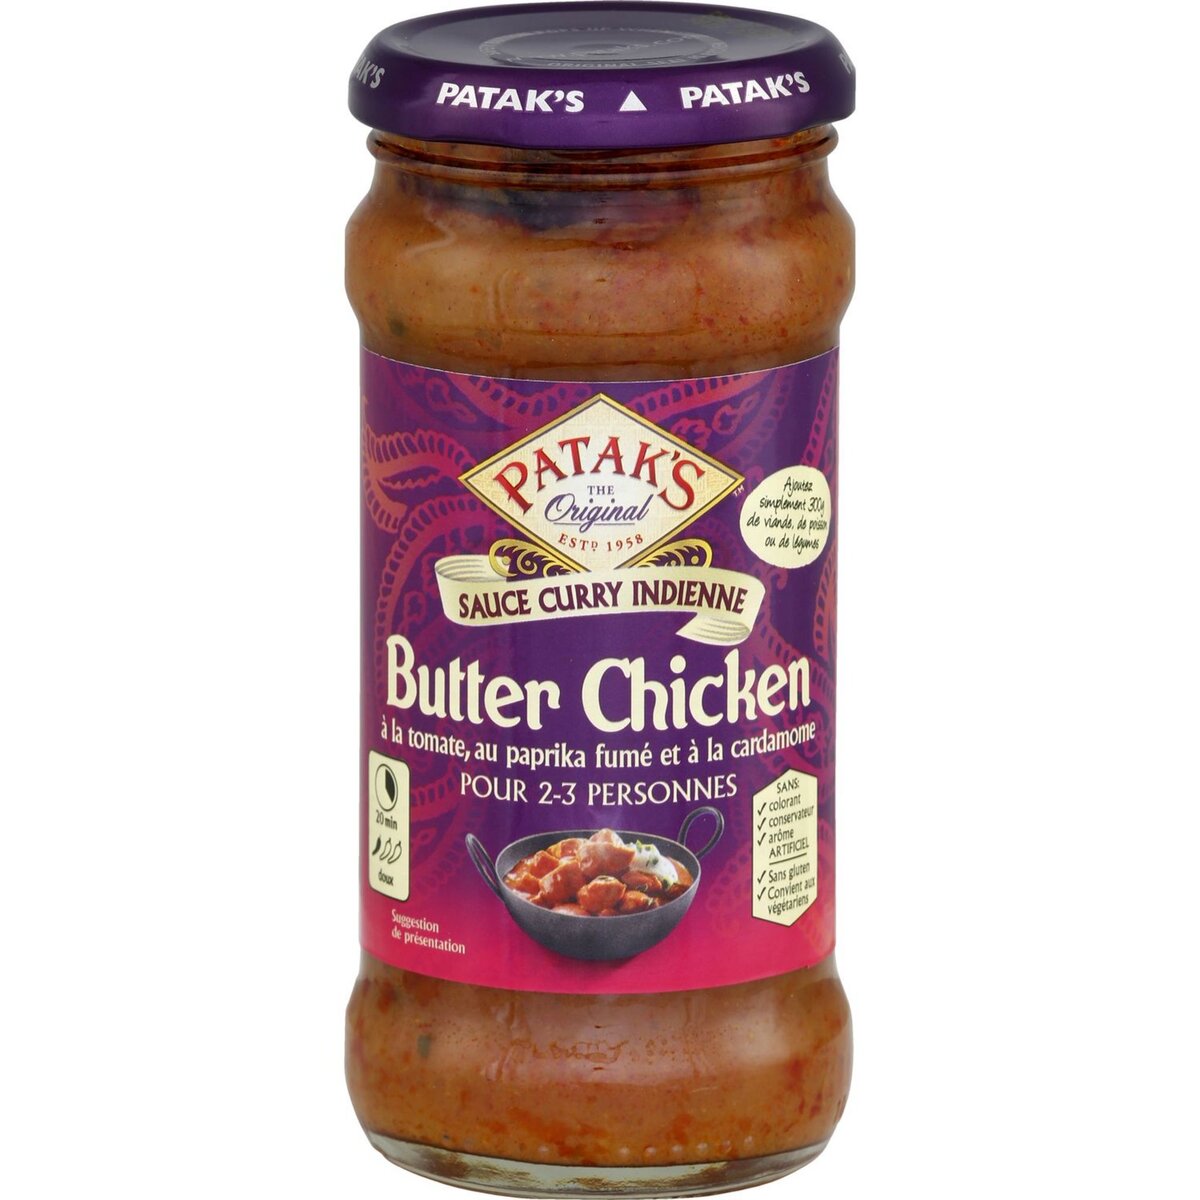 PATAK'S Patak's Sauce butter chicken tomate paprika cardamome 2-3 personnes 350g 2-3 personnes 350g